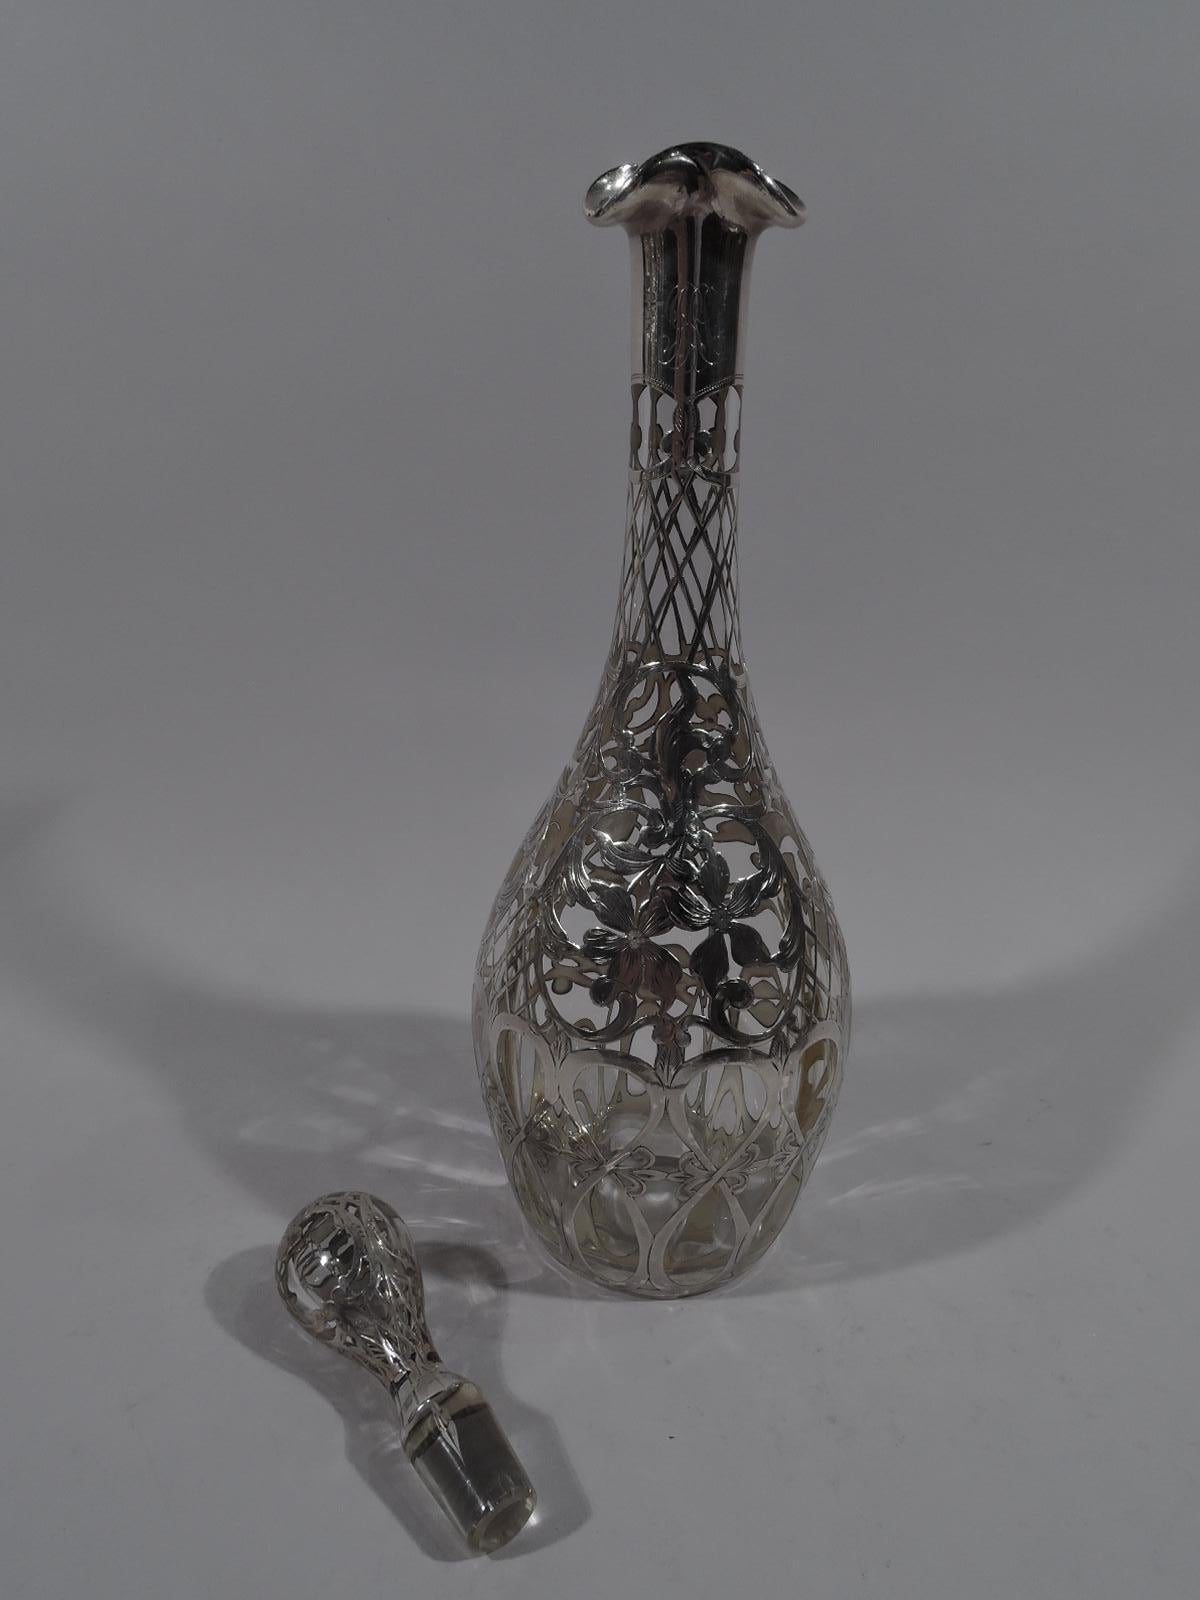 Turn of the century American Art Nouveau bottle decanter. Clear glass ovoid with tall cylindrical neck and ruffled rim. Ovoid stopper with short plug. Engraved silver overlay with loose flower heads surrounded by trellis; joined and elongated figure